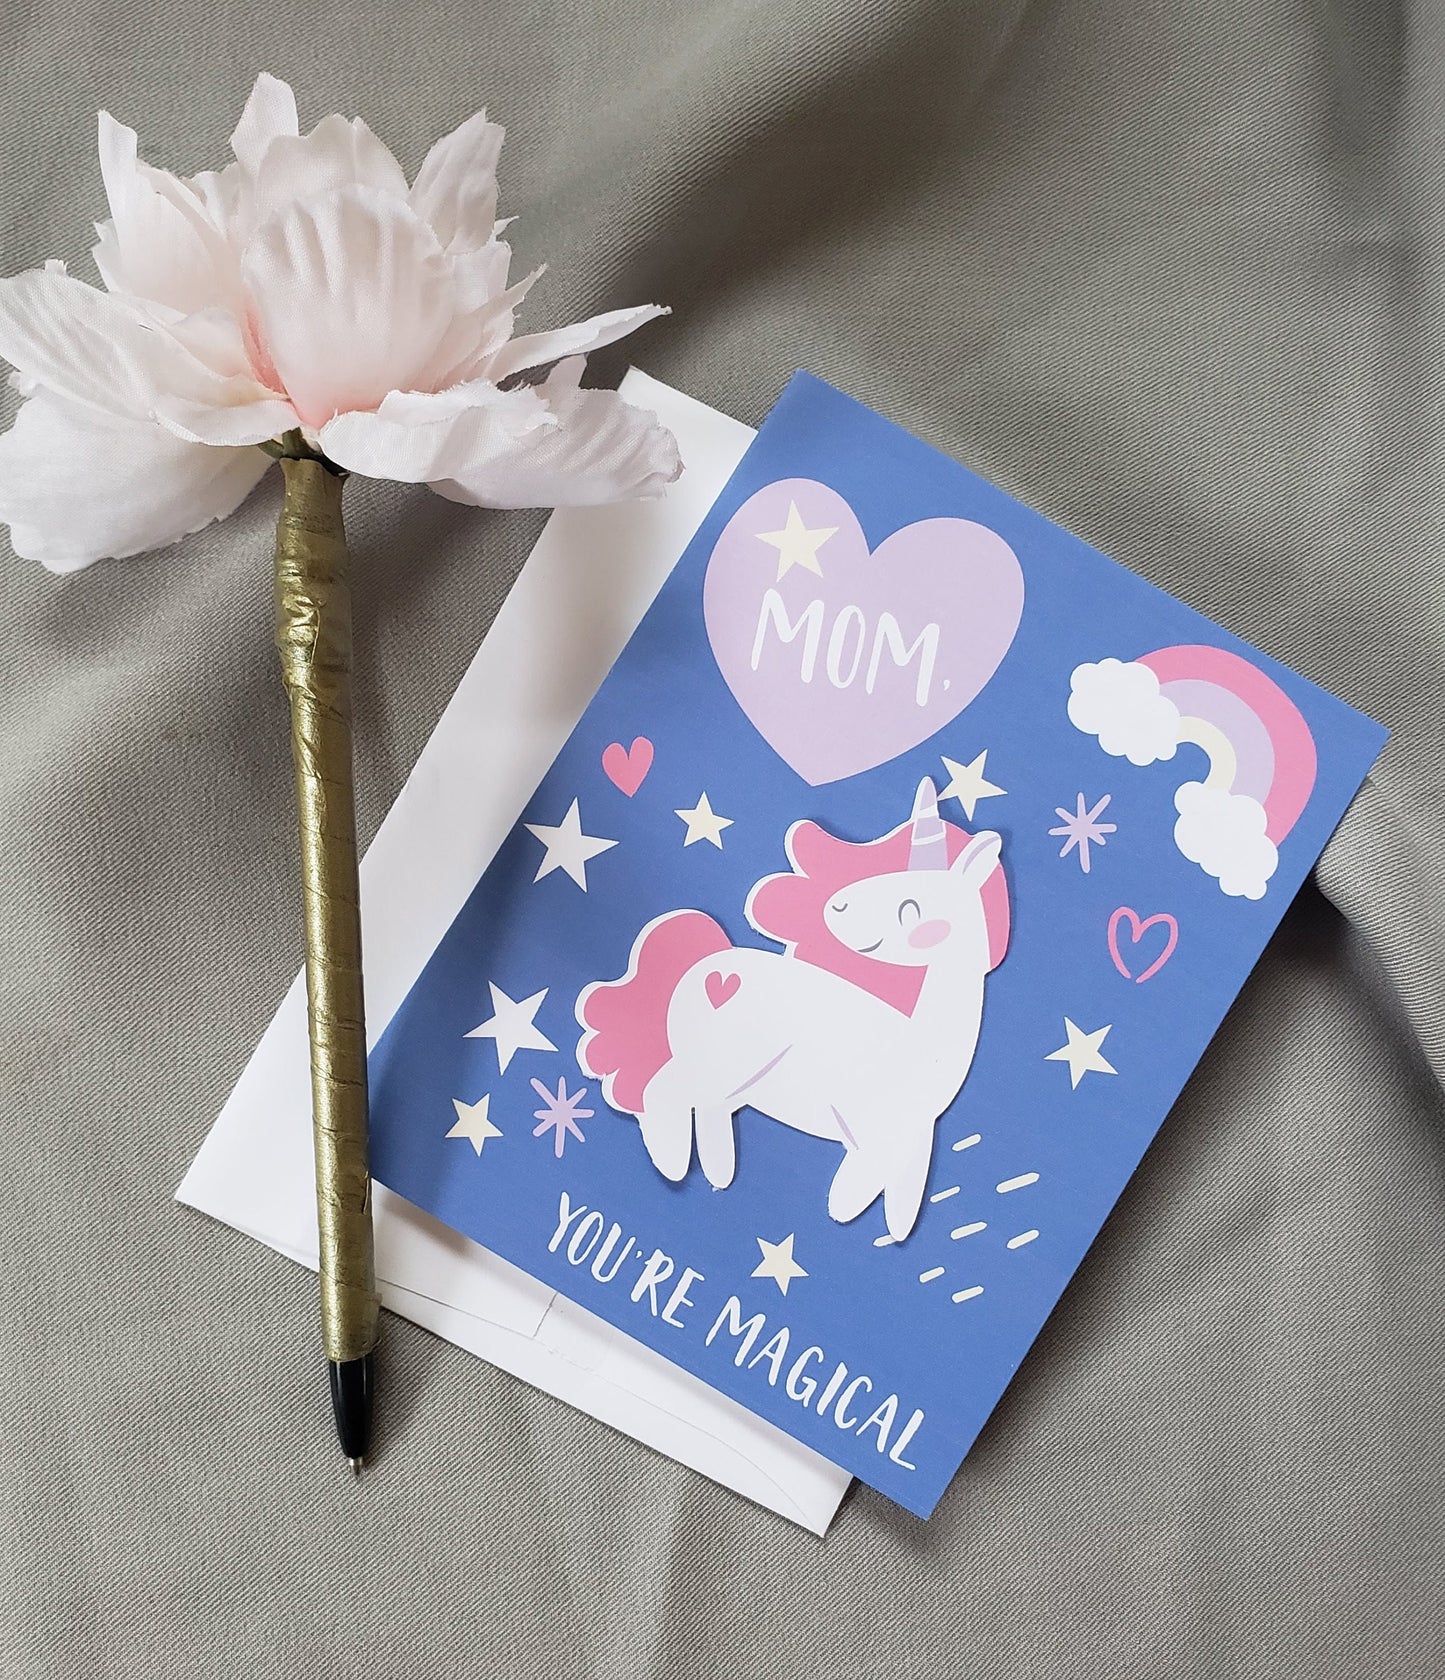 Mother's Day Card - Mom, You're Magical (with Unicorn Vinyl Decal Sticker!)